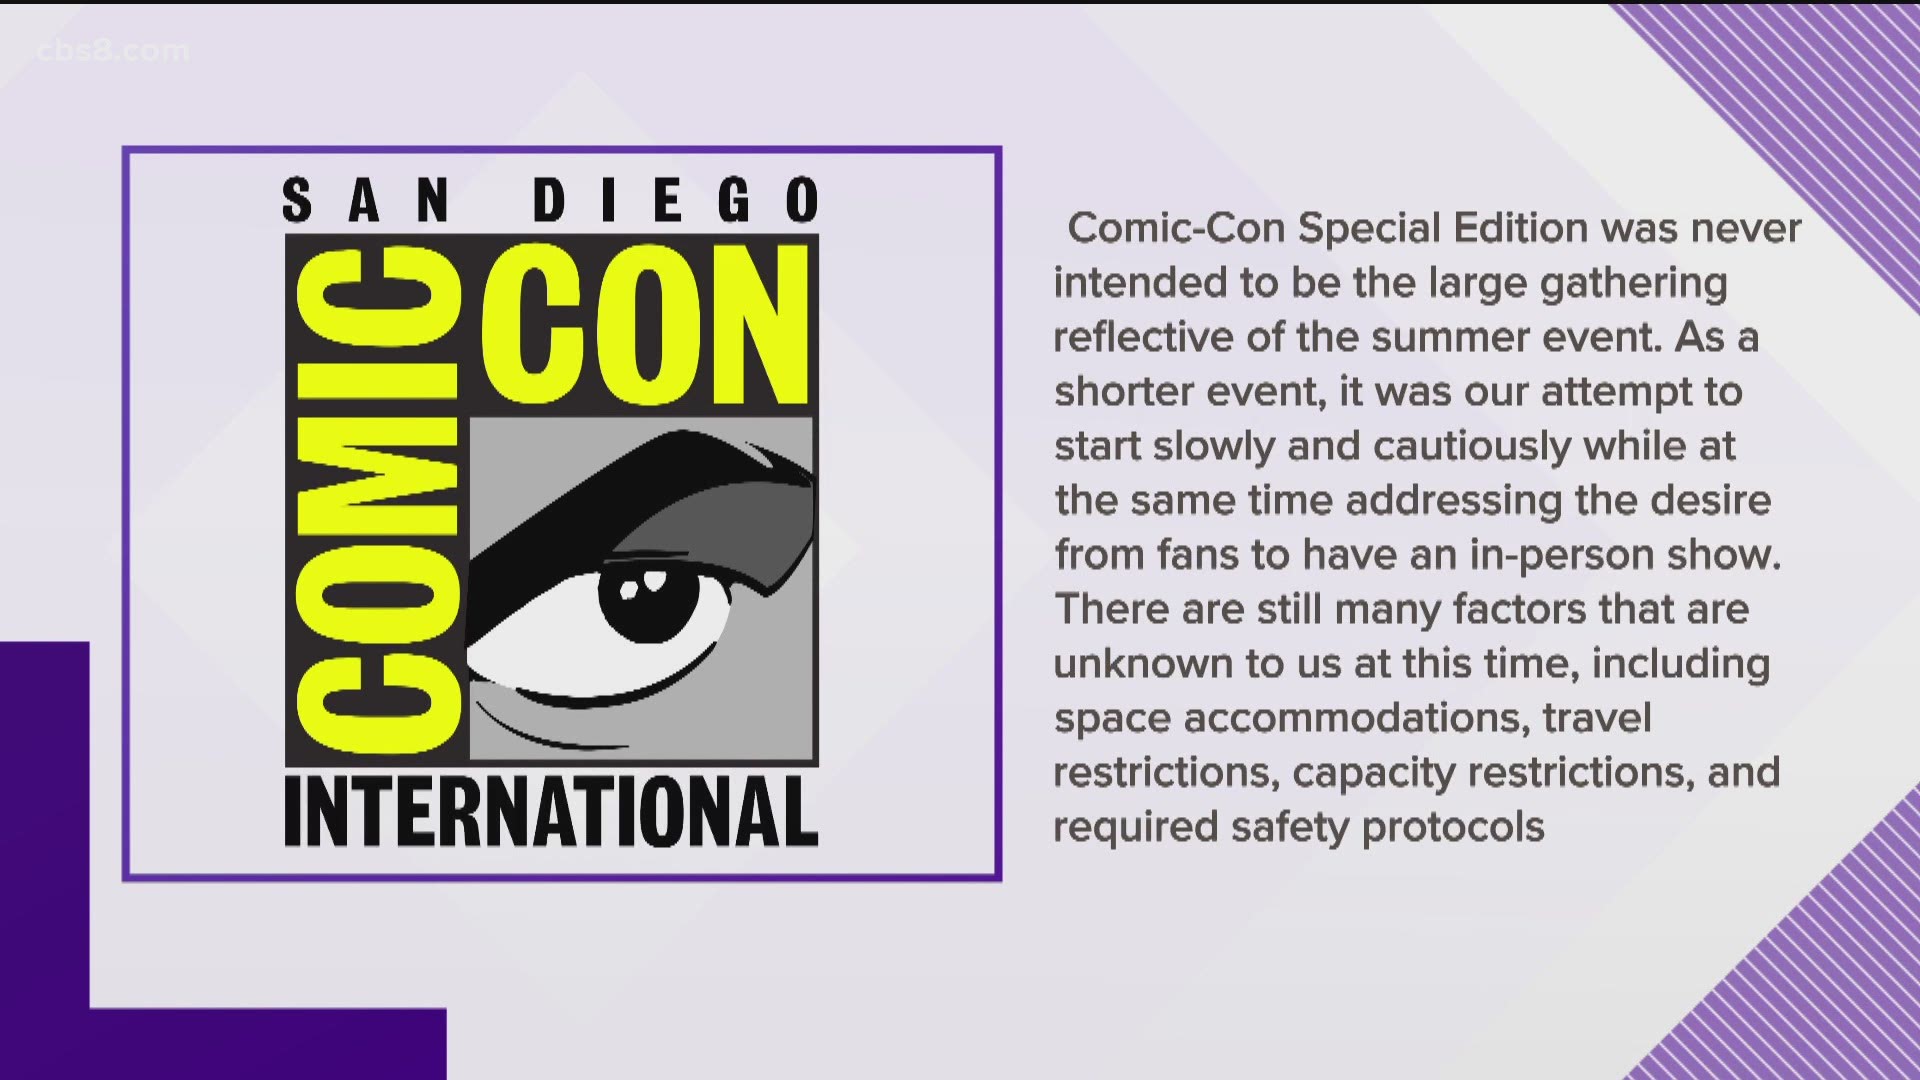 "Comic-Con Special Edition" is slated to take place Nov. 26-28 at the San Diego Convention Center. Comic-Con@Home is scheduled to take place July 23-25.